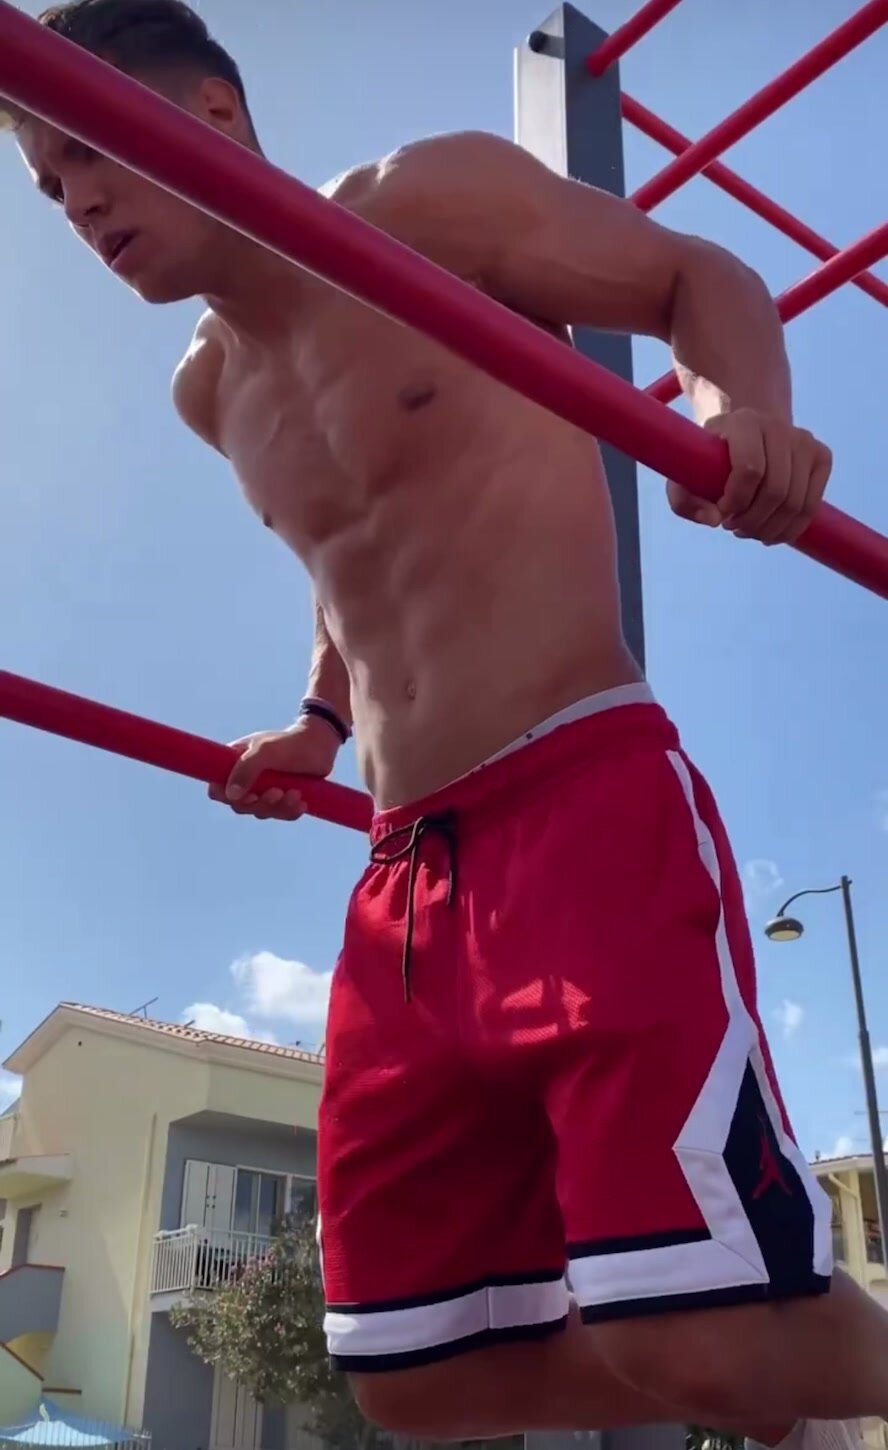 Italian sexy young muscle man doing workout in public